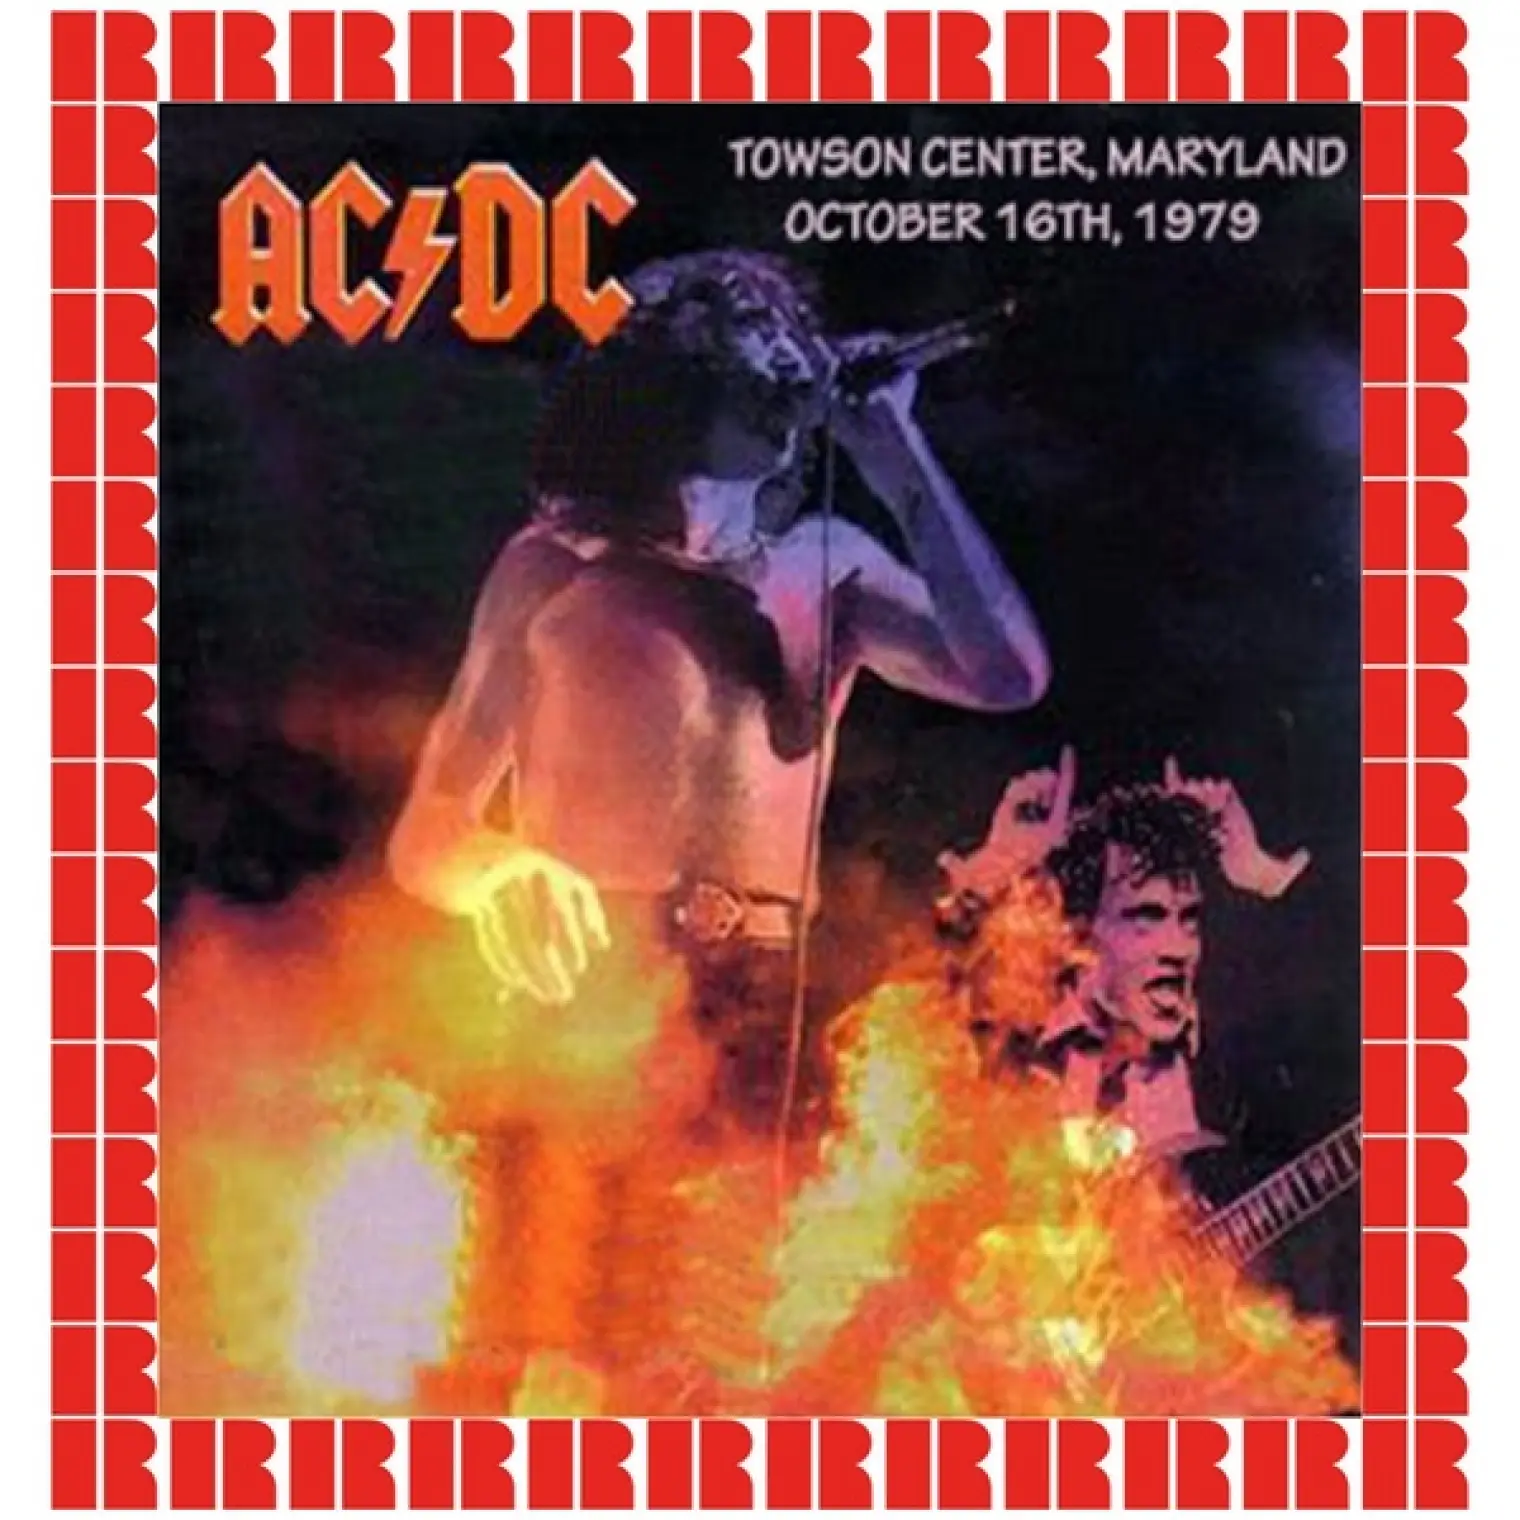 Towson Center, Maryland, 1979 (Hd Remastered Edition) -  AC/DC 